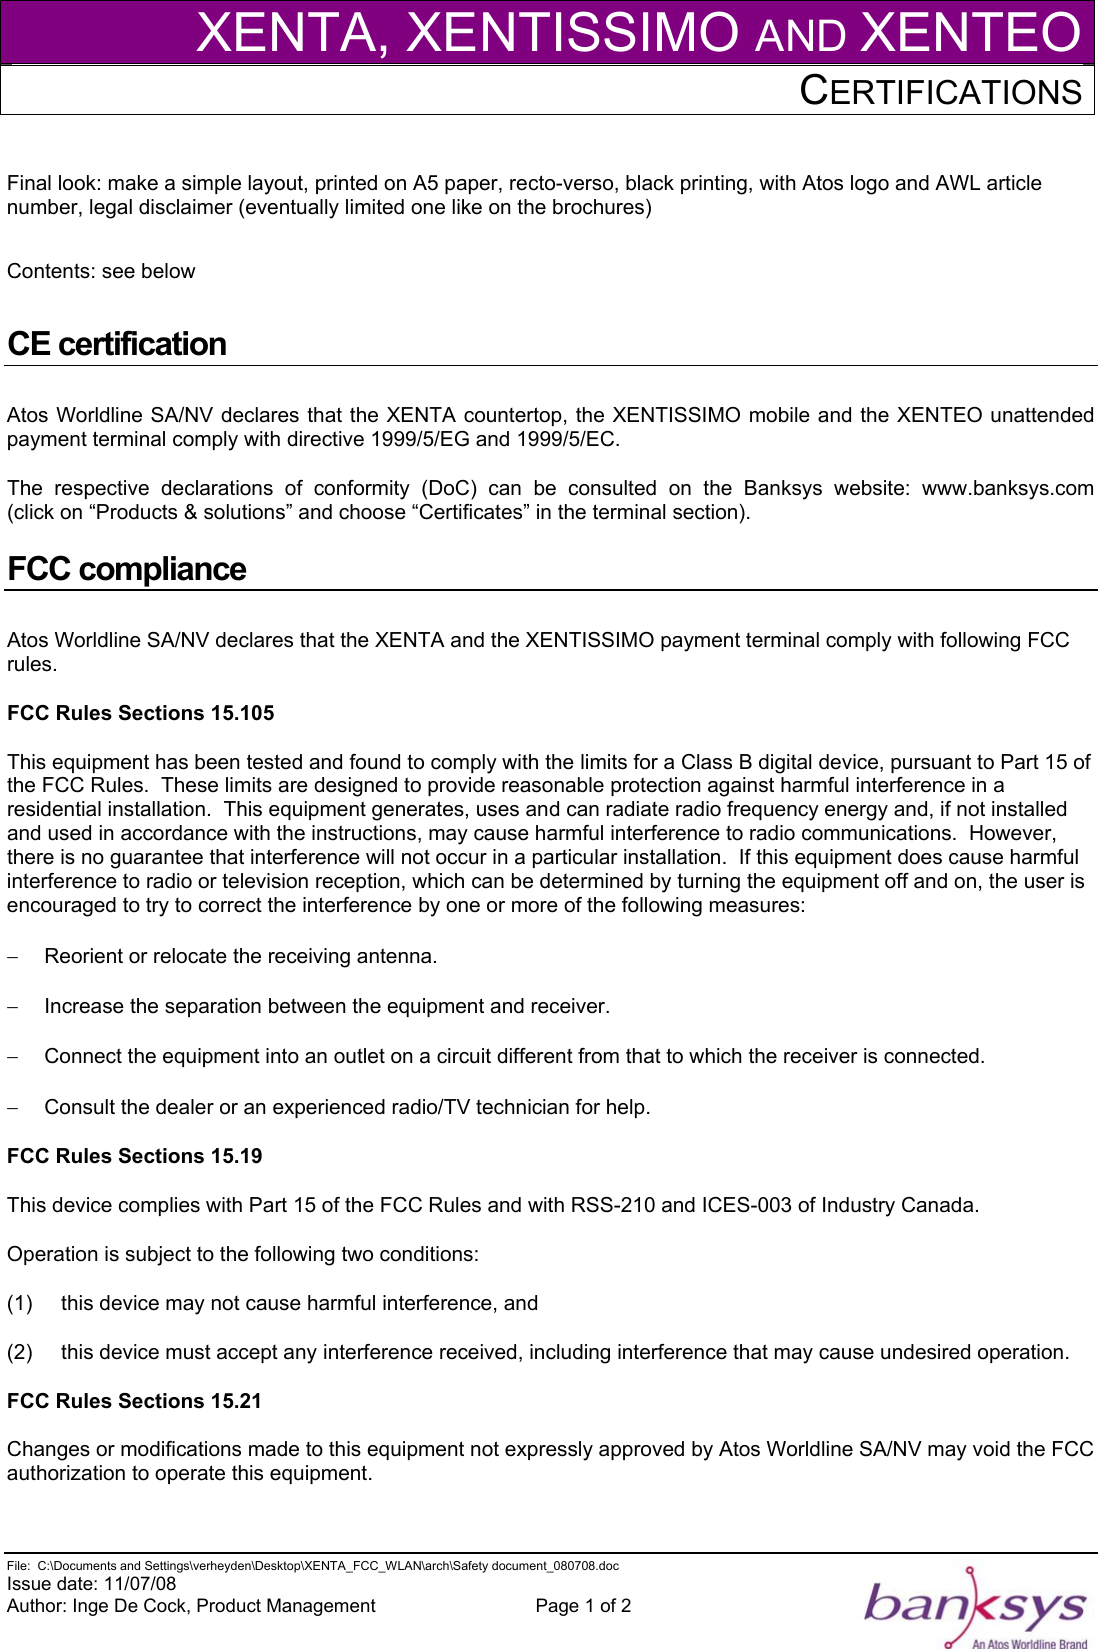 XENTA, XENTISSIMO AND XENTEOCERTIFICATIONS    File:  C:\Documents and Settings\verheyden\Desktop\XENTA_FCC_WLAN\arch\Safety document_080708.doc  Issue date: 11/07/08 Author: Inge De Cock, Product Management  Page 1 of 2   Final look: make a simple layout, printed on A5 paper, recto-verso, black printing, with Atos logo and AWL article number, legal disclaimer (eventually limited one like on the brochures)  Contents: see below  CE certification Atos Worldline SA/NV declares that the XENTA countertop, the XENTISSIMO mobile and the XENTEO unattended payment terminal comply with directive 1999/5/EG and 1999/5/EC. The respective declarations of conformity (DoC) can be consulted on the Banksys website:  www.banksys.com      (click on “Products &amp; solutions” and choose “Certificates” in the terminal section). FCC compliance Atos Worldline SA/NV declares that the XENTA and the XENTISSIMO payment terminal comply with following FCC rules. FCC Rules Sections 15.105 This equipment has been tested and found to comply with the limits for a Class B digital device, pursuant to Part 15 of the FCC Rules.  These limits are designed to provide reasonable protection against harmful interference in a residential installation.  This equipment generates, uses and can radiate radio frequency energy and, if not installed and used in accordance with the instructions, may cause harmful interference to radio communications.  However, there is no guarantee that interference will not occur in a particular installation.  If this equipment does cause harmful interference to radio or television reception, which can be determined by turning the equipment off and on, the user is encouraged to try to correct the interference by one or more of the following measures: −  Reorient or relocate the receiving antenna. −  Increase the separation between the equipment and receiver. −  Connect the equipment into an outlet on a circuit different from that to which the receiver is connected. −  Consult the dealer or an experienced radio/TV technician for help. FCC Rules Sections 15.19 This device complies with Part 15 of the FCC Rules and with RSS-210 and ICES-003 of Industry Canada. Operation is subject to the following two conditions: (1)     this device may not cause harmful interference, and  (2)     this device must accept any interference received, including interference that may cause undesired operation. FCC Rules Sections 15.21 Changes or modifications made to this equipment not expressly approved by Atos Worldline SA/NV may void the FCC authorization to operate this equipment. 